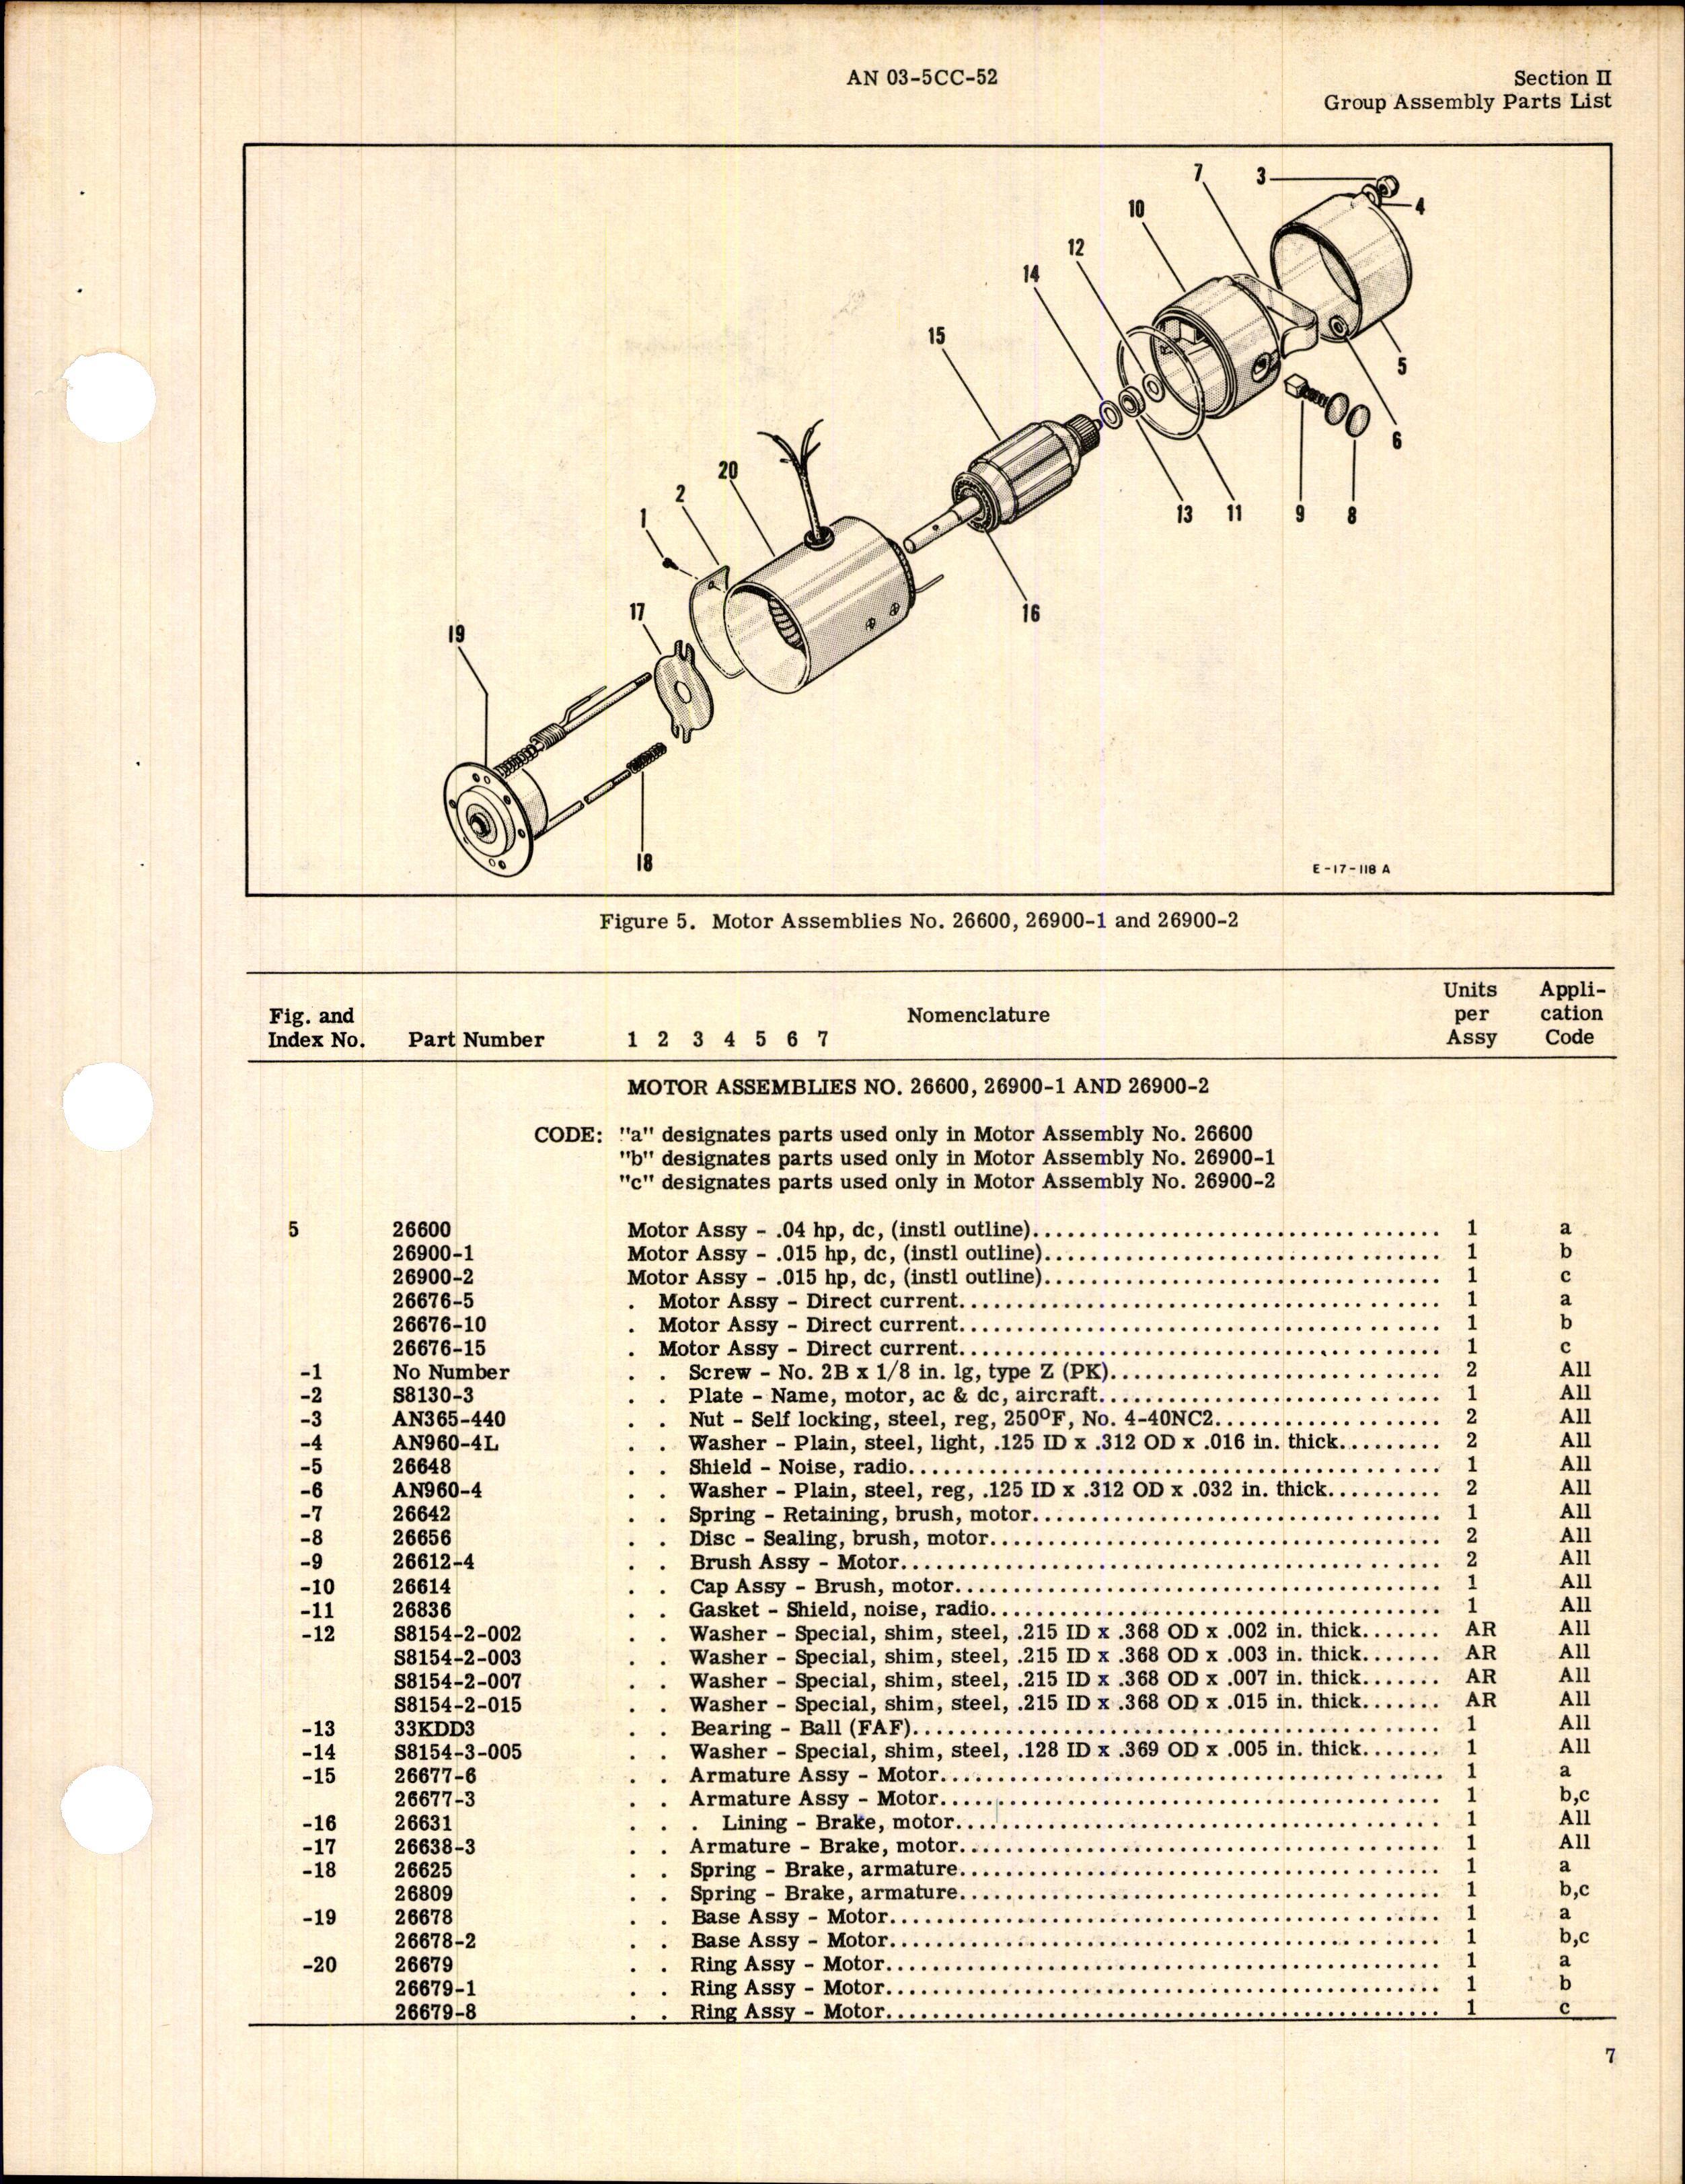 Sample page 7 from AirCorps Library document: Parts Catalog for Airesearch Electric Motors